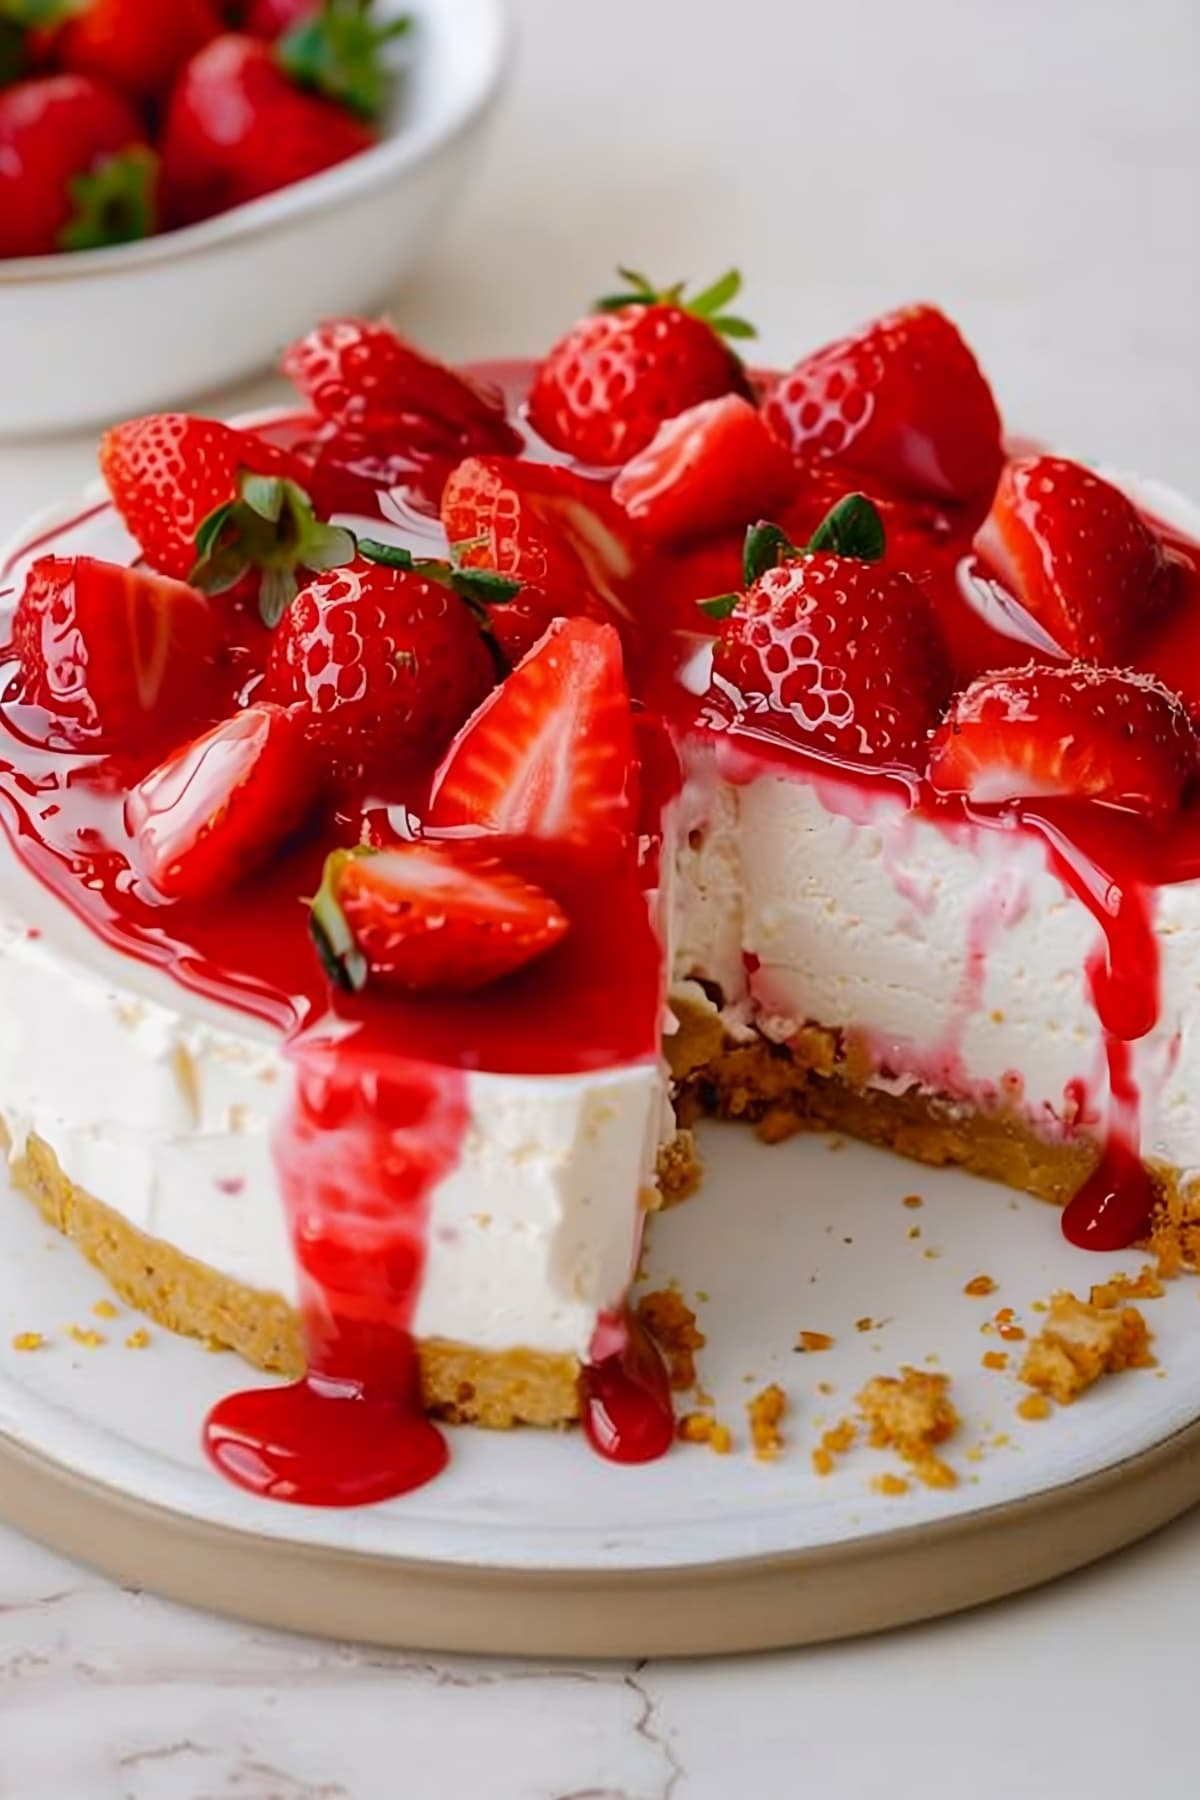 Rich and delightful strawberry cheesecake